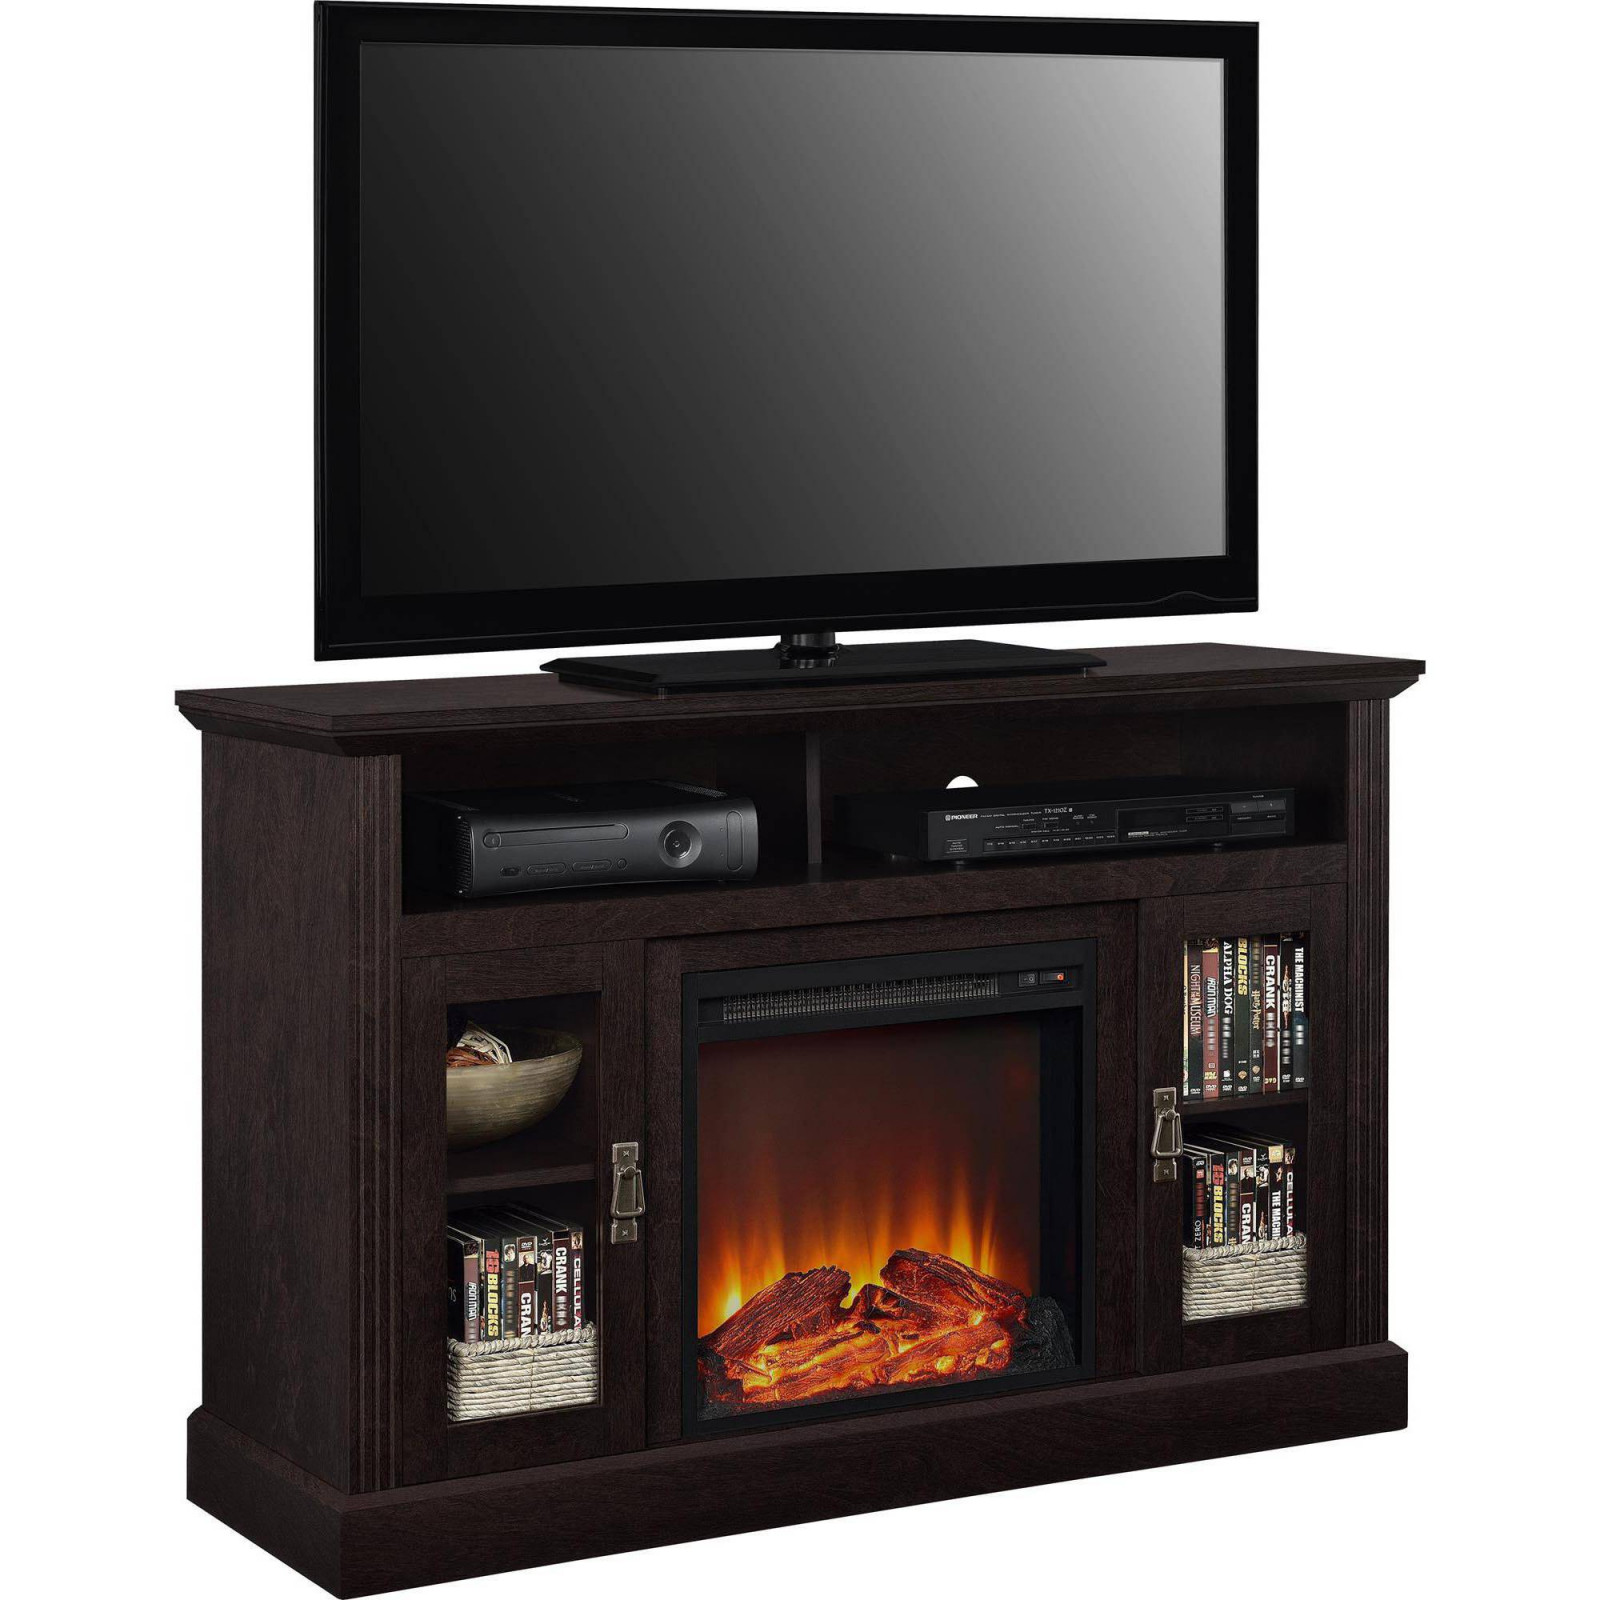 55 Inch Electric Fireplace Lovely 35 Minimaliste Electric Fireplace Tv Stand